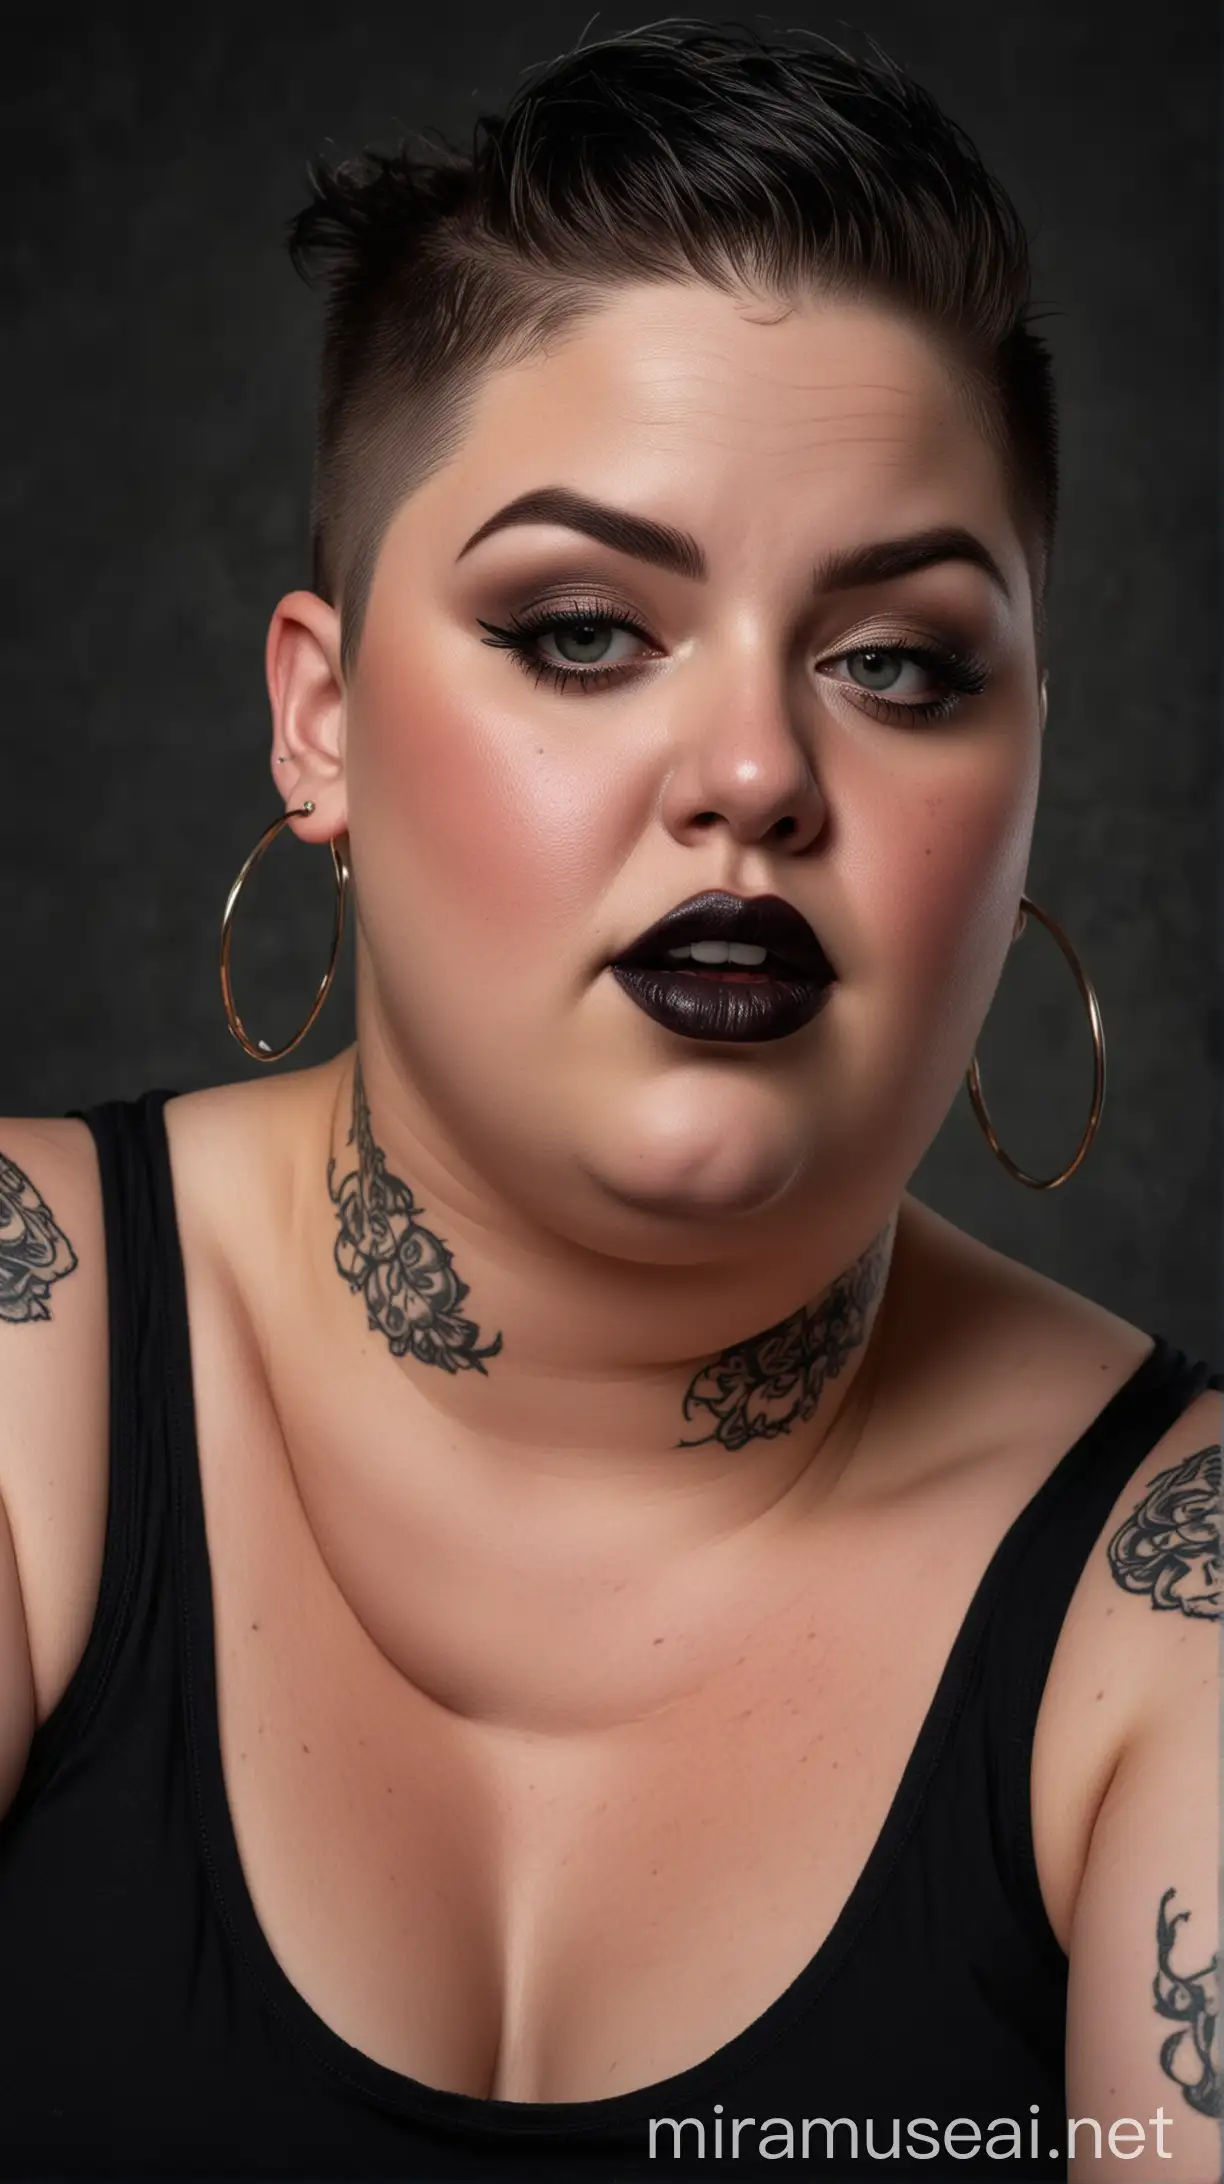 Intense Obese Woman Portrait with Black Lipstick and Tattoos